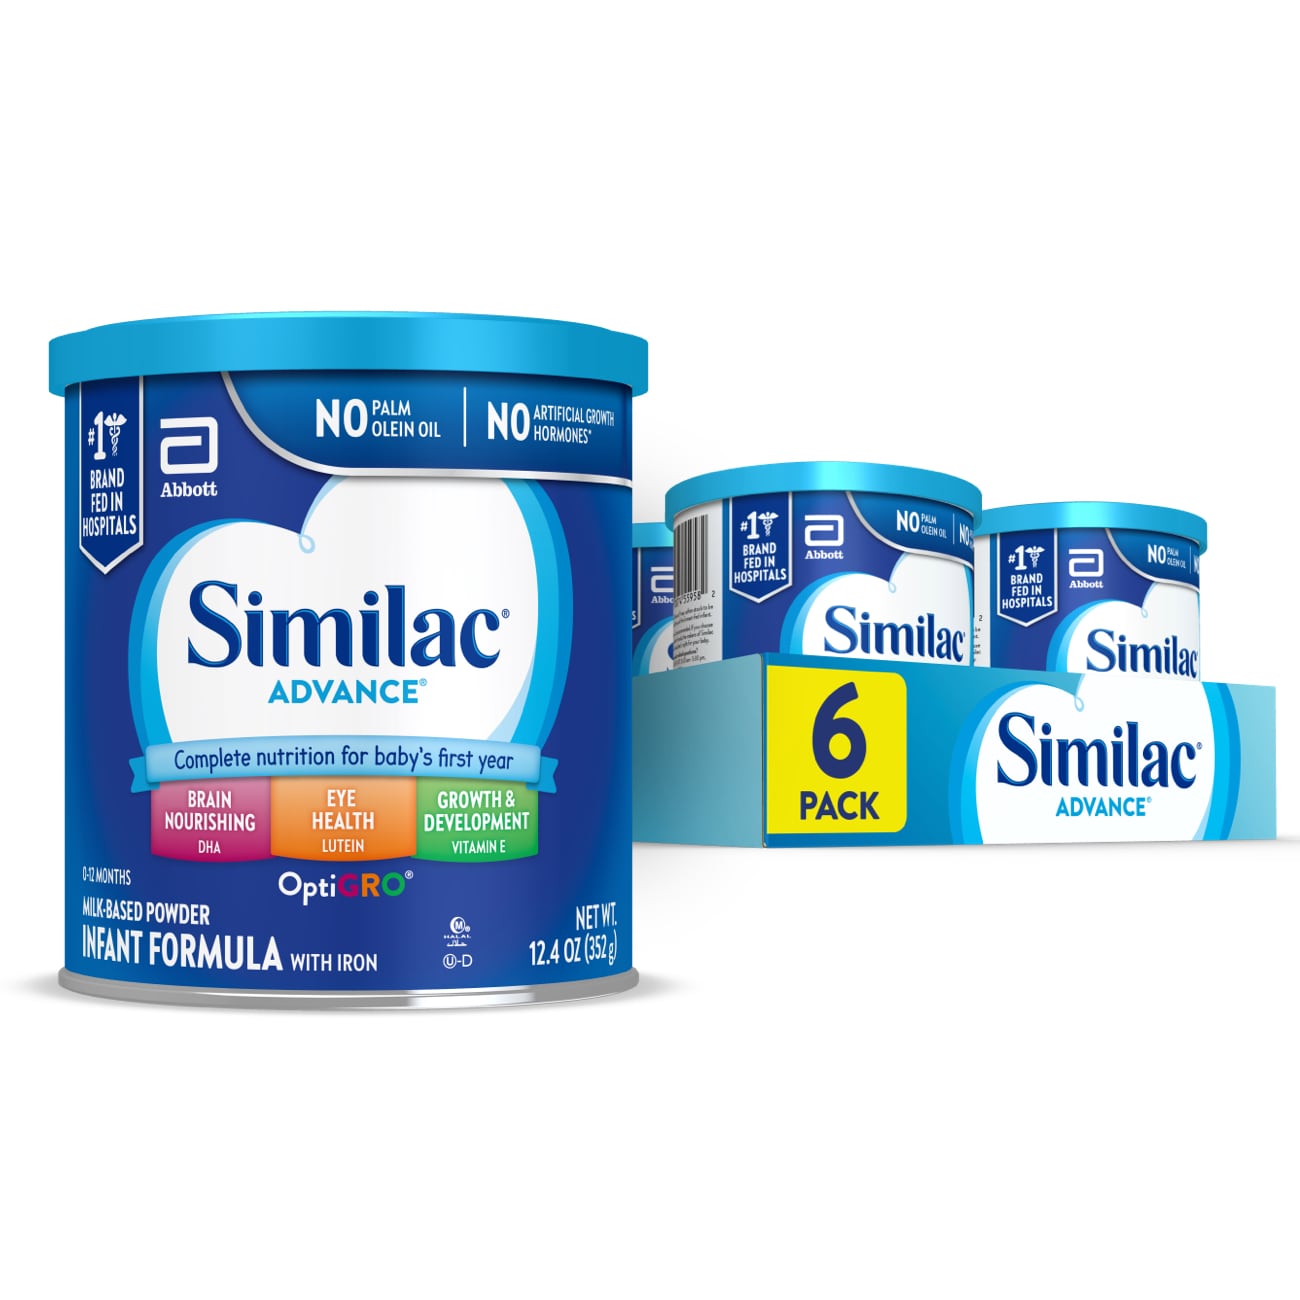 Similac® Advance®* Powder Baby Formula with Iron, DHA, Lutein, 12.4-oz Can, Pack of 6 - image 1 of 13